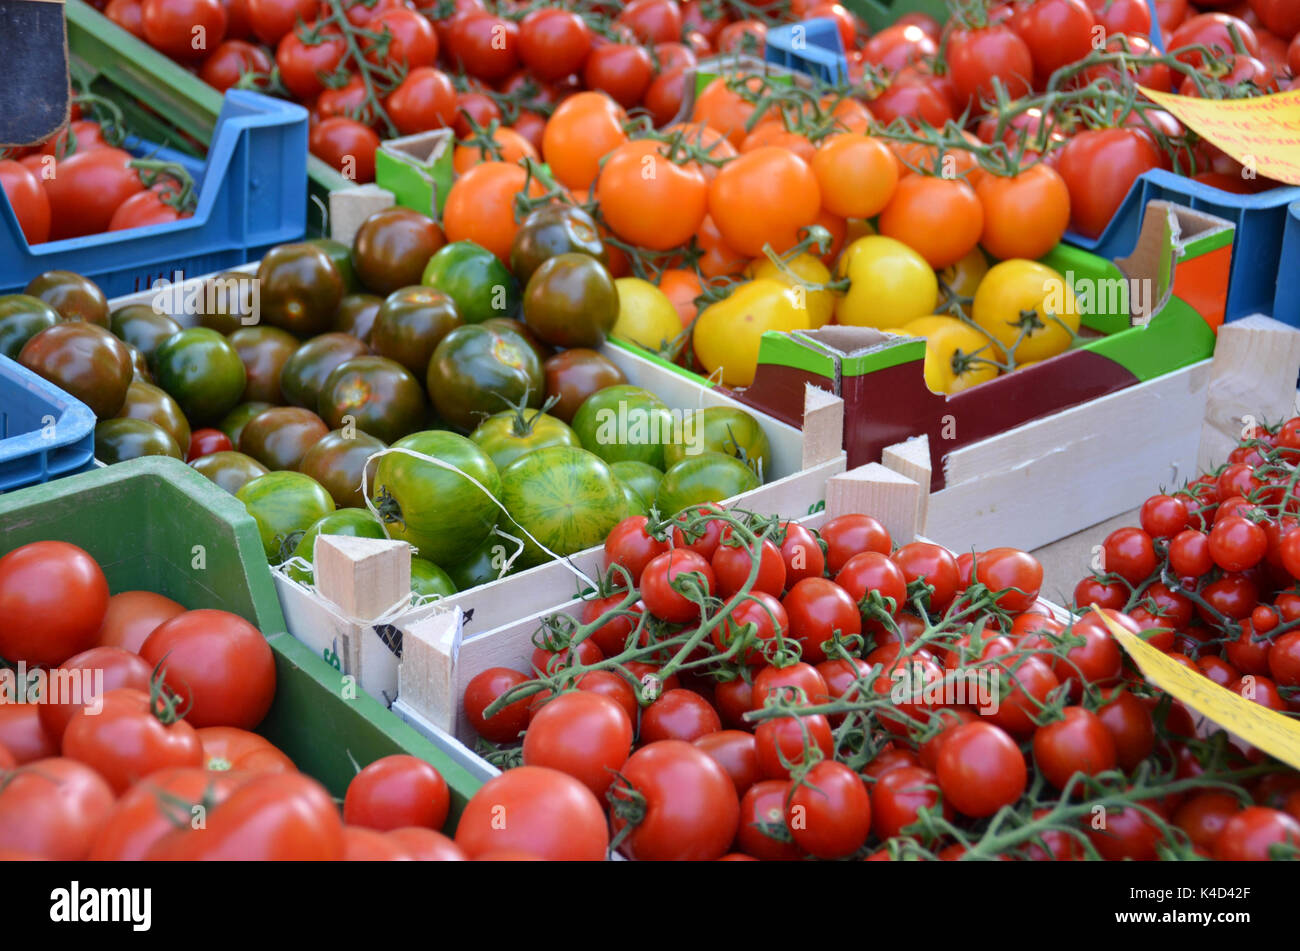 Vegetables On The Weekly Market, Various Tomato Varieties Stock Photo